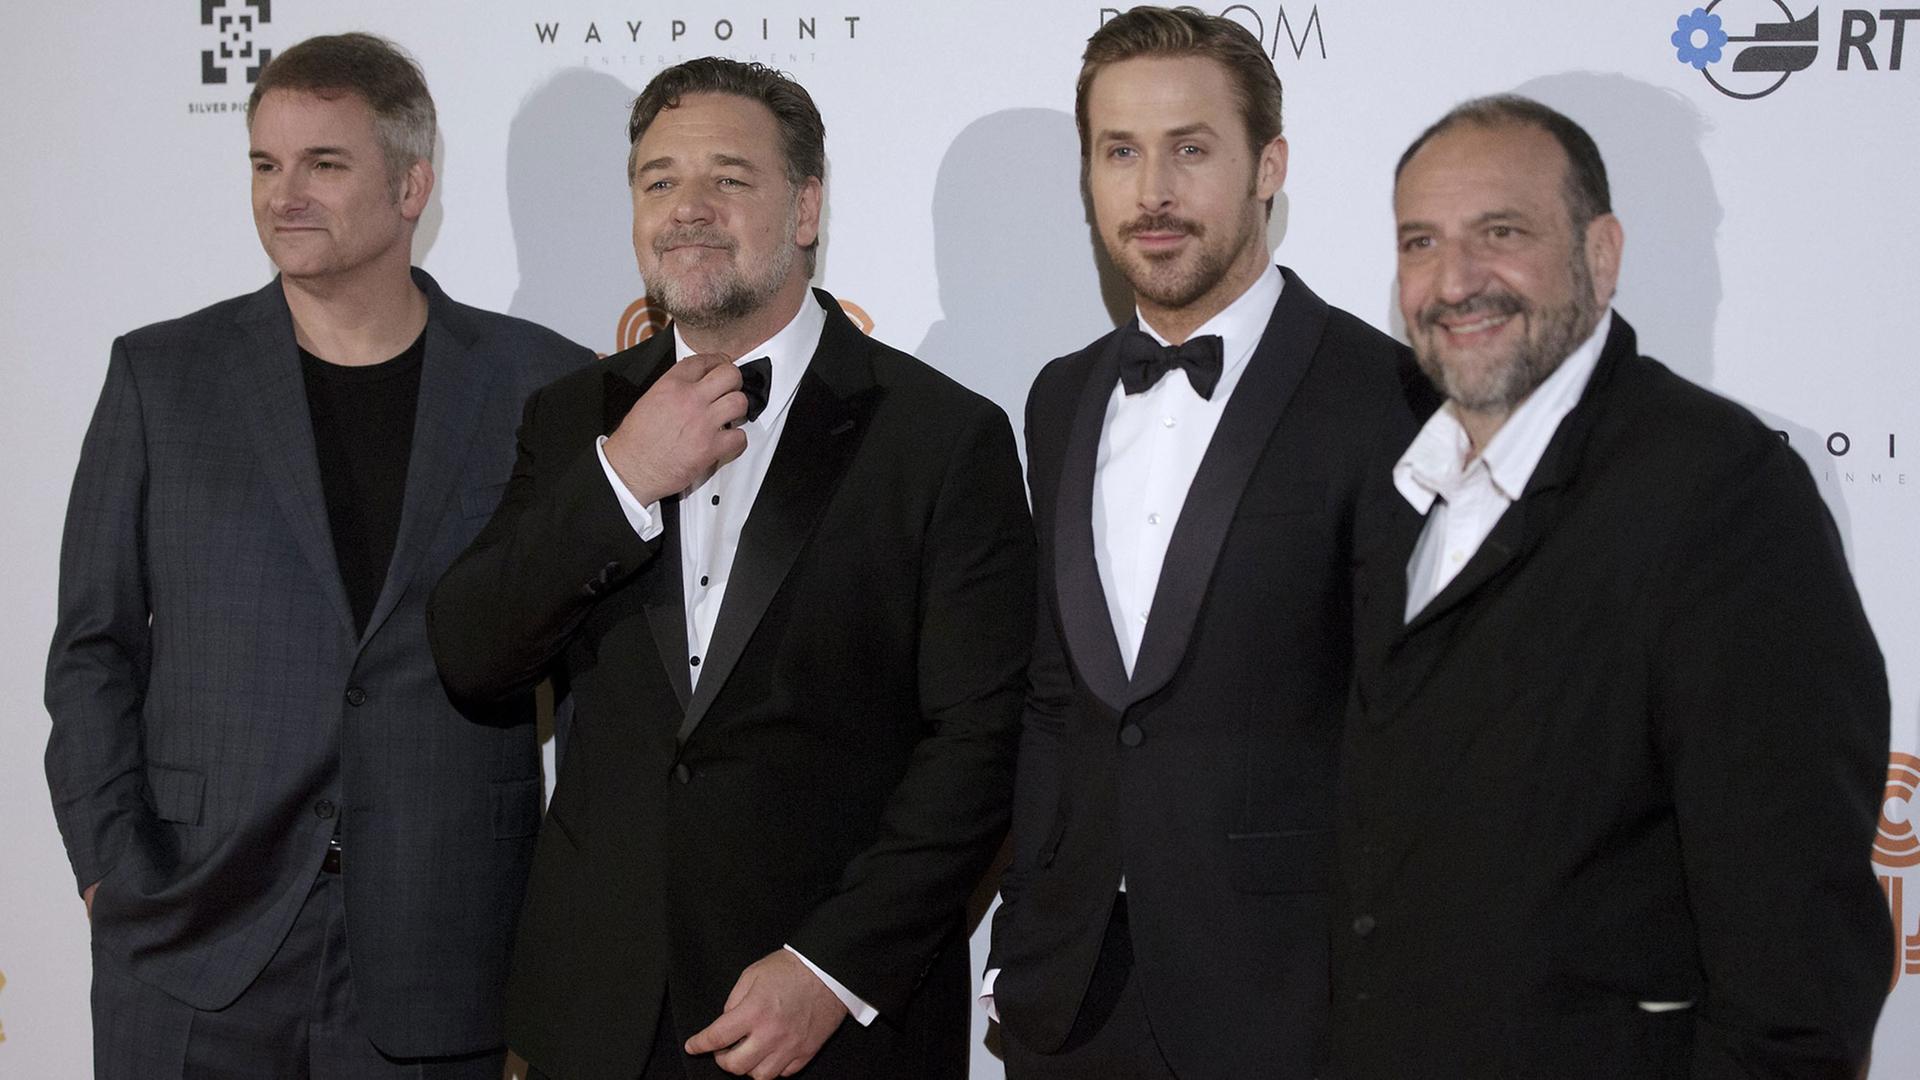 ©Donatella Giagnori / EIDON/MAXPPP ; 1191883 : (Donatella Giagnori / EIDON), 2016-05-20 Roma - Photocall of the film The Nice Guys in Rome - Shane Black, Russell Crowe, Ryan Gosling and Joel Silver attend a photocall for The Nice Guys at the Space Cinema in Rome on May 20, 2016